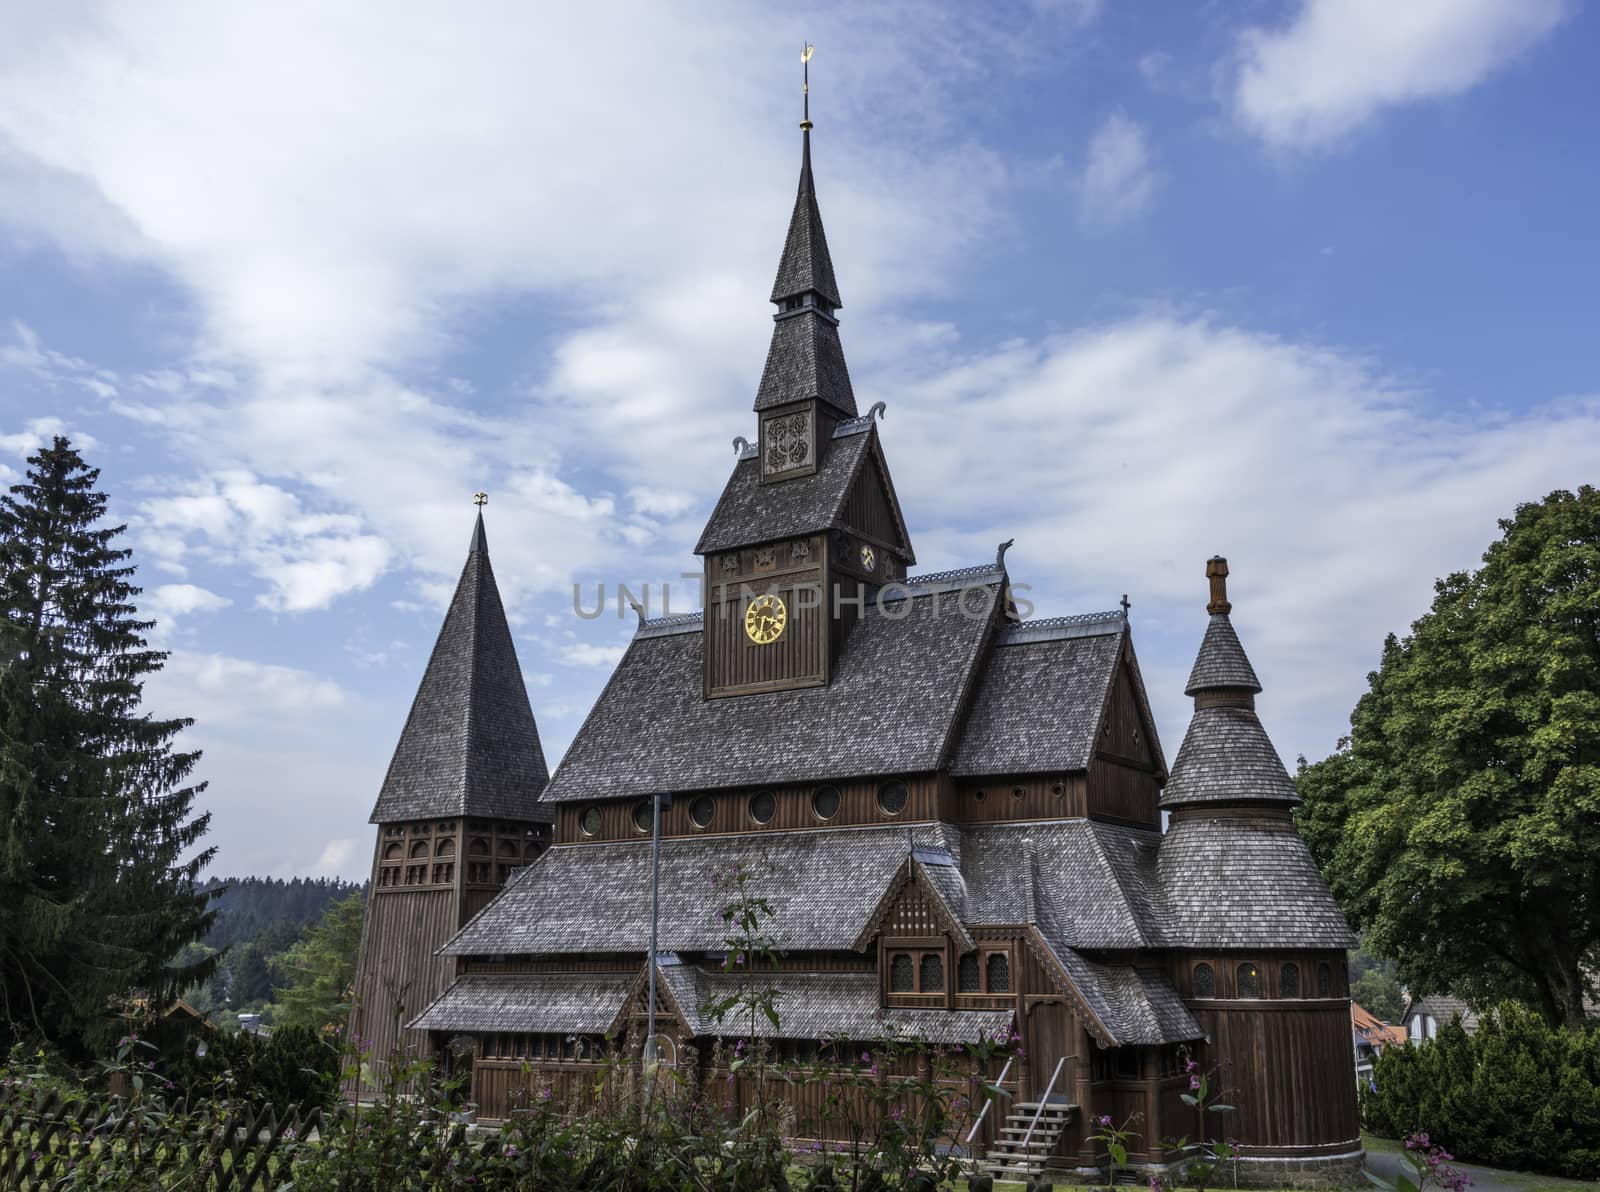 old stave church totally from wood in germany by compuinfoto